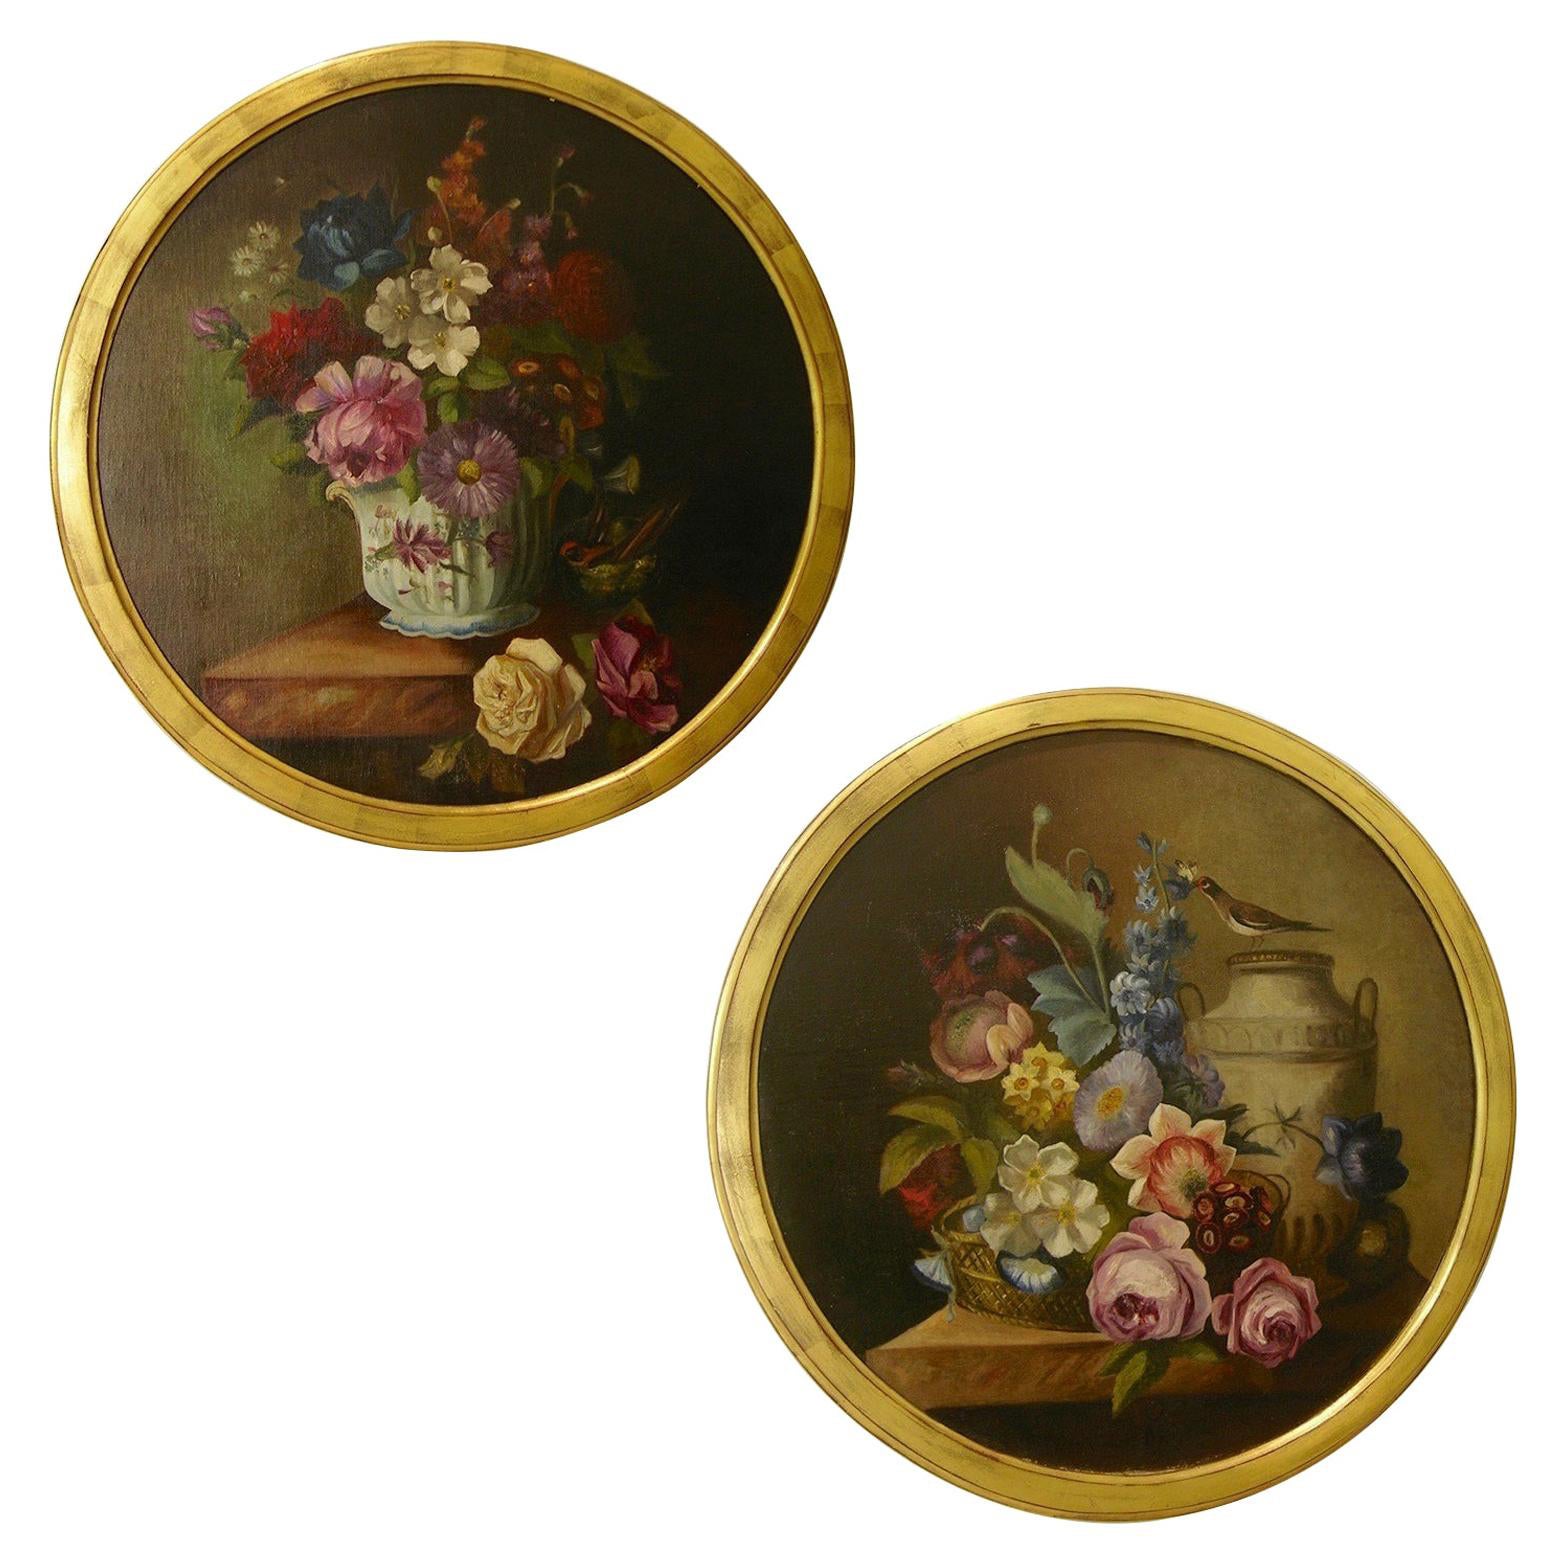 1880 French Provincial Pair of Round Still Life Oil Paintings in Gilt Frames